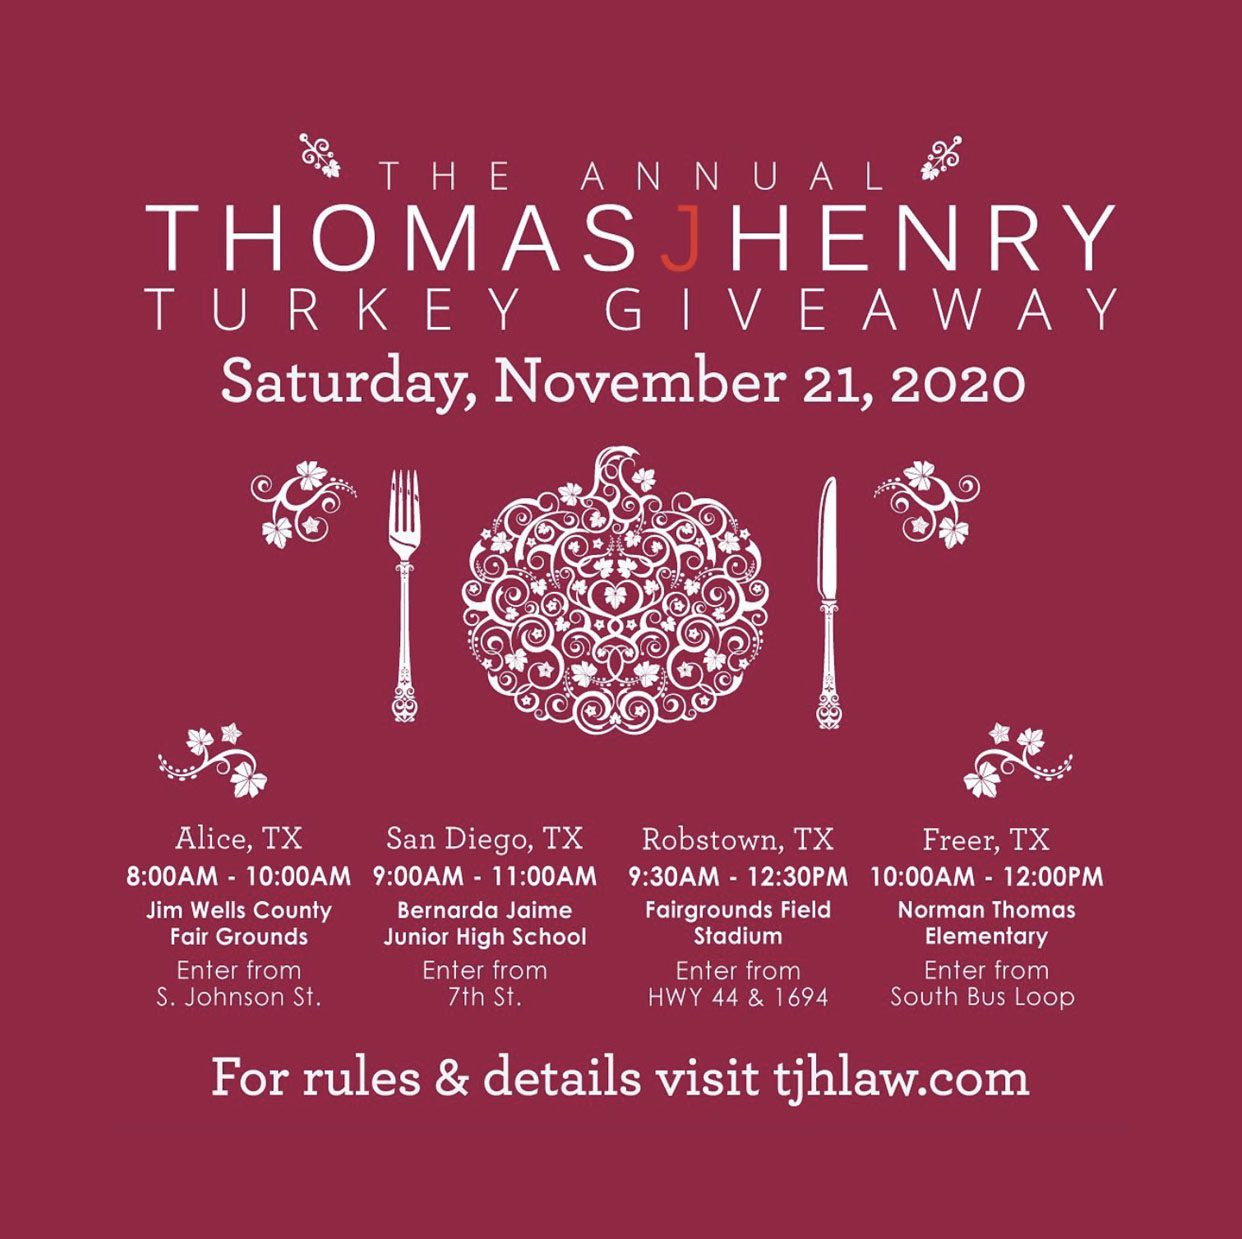 Thomas J. Henry Annual Turkey Giveaway details